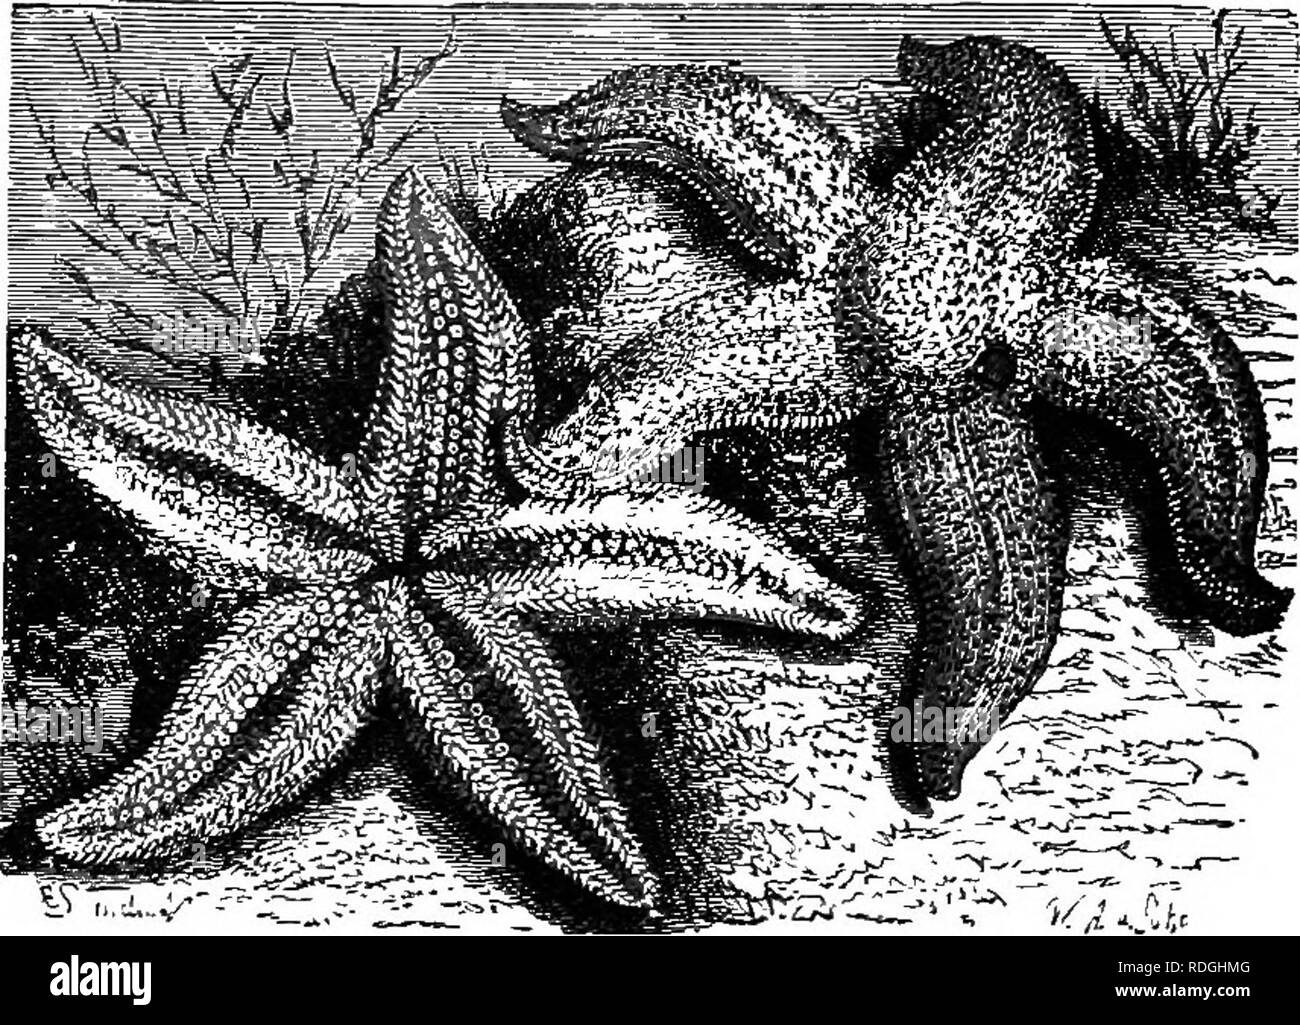 . Elementary text-book of zoology. 156 ARCHICCELOMATA. CHAPTER XV. ARCHICCELOMA TA. ASTERIAS. BALANOGLOSSnS. LOPHOPUS. SAGITTA. WALDHEIMIA. I.—ASTERIAS. Phylum Archicoelomata. Sub-Phylum Echinodermata. Class Asteroidea. Fig. 89.—Asterias Rubens x .. On the left the oral surface is seen with the five ambulacra! groove-; and tuhe-feet; on the right is the aboral surface with the madreporite between the two lower arms. Asterias rubens (the starfish) is one of the commonest marine littoral animals. The body is of a dull yellow-red colour, flattened and produced into five equal-sized arms. Externa Stock Photo